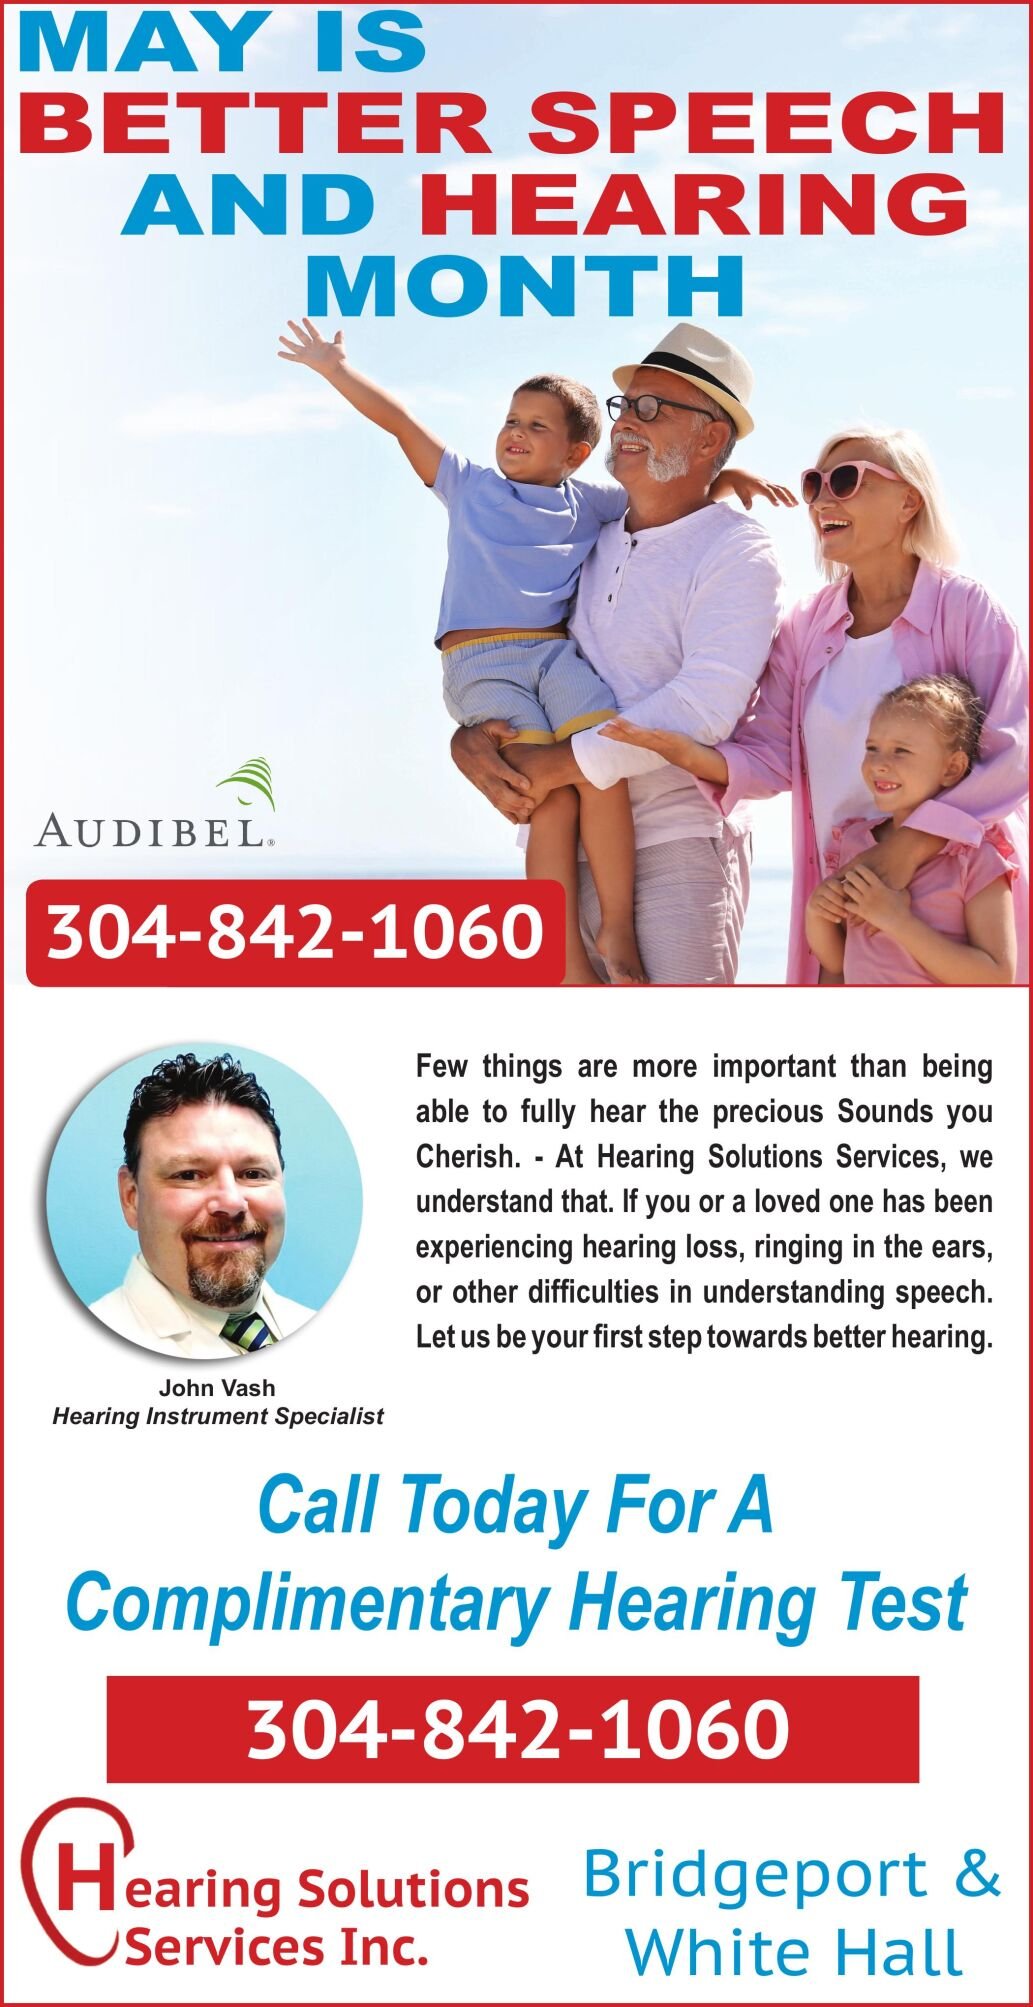 HEARING SOLUTIONS SERVICES